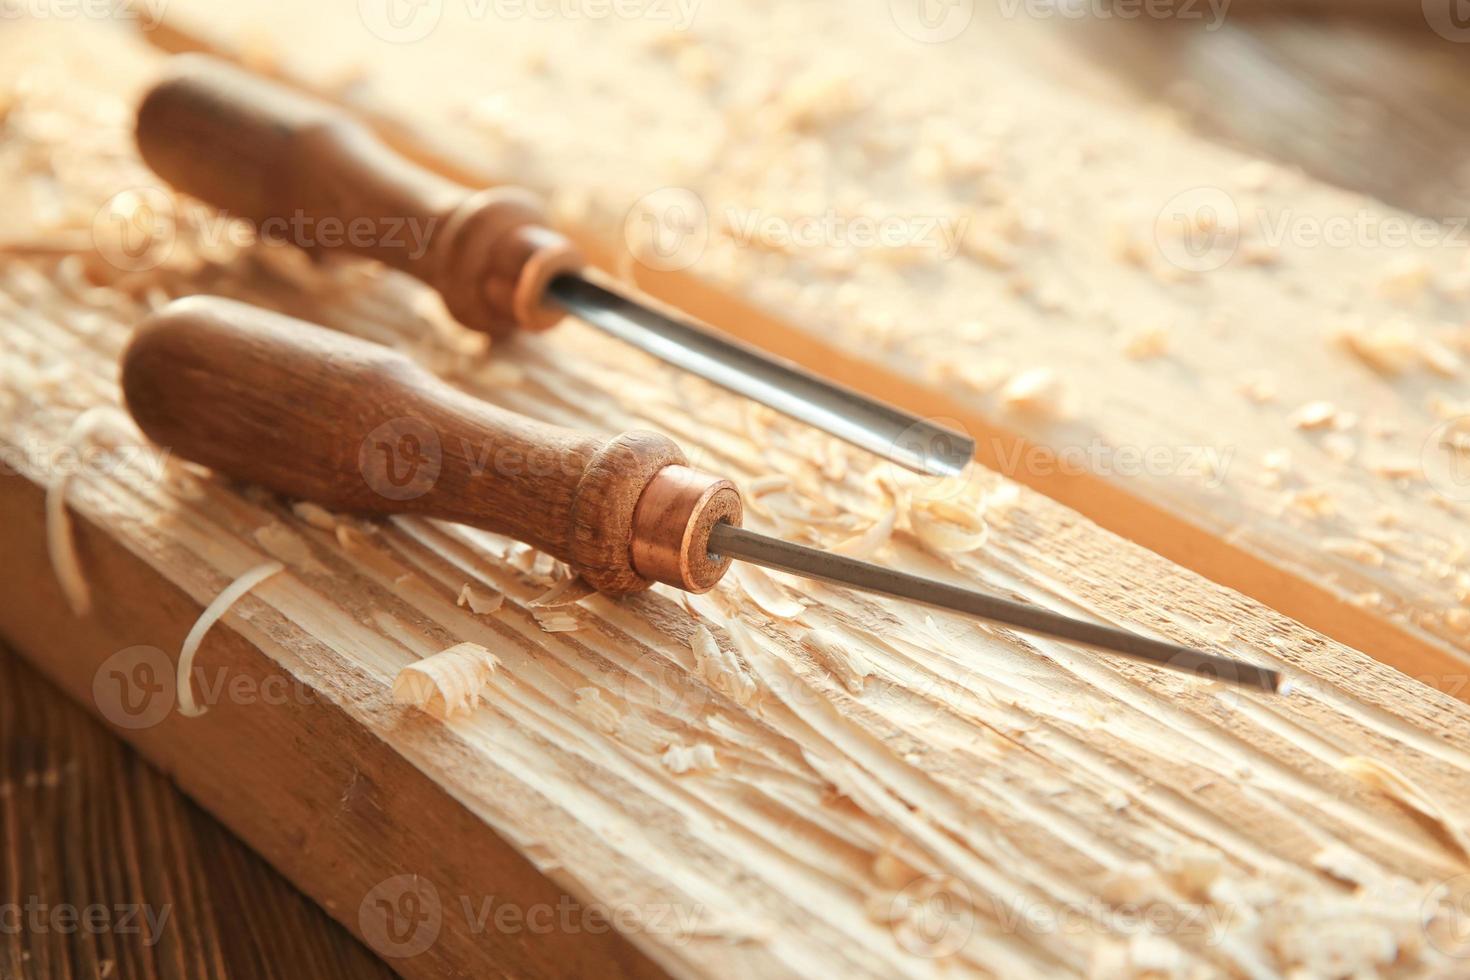 Chisels, wooden boards and sawdust in carpenter's workshop photo